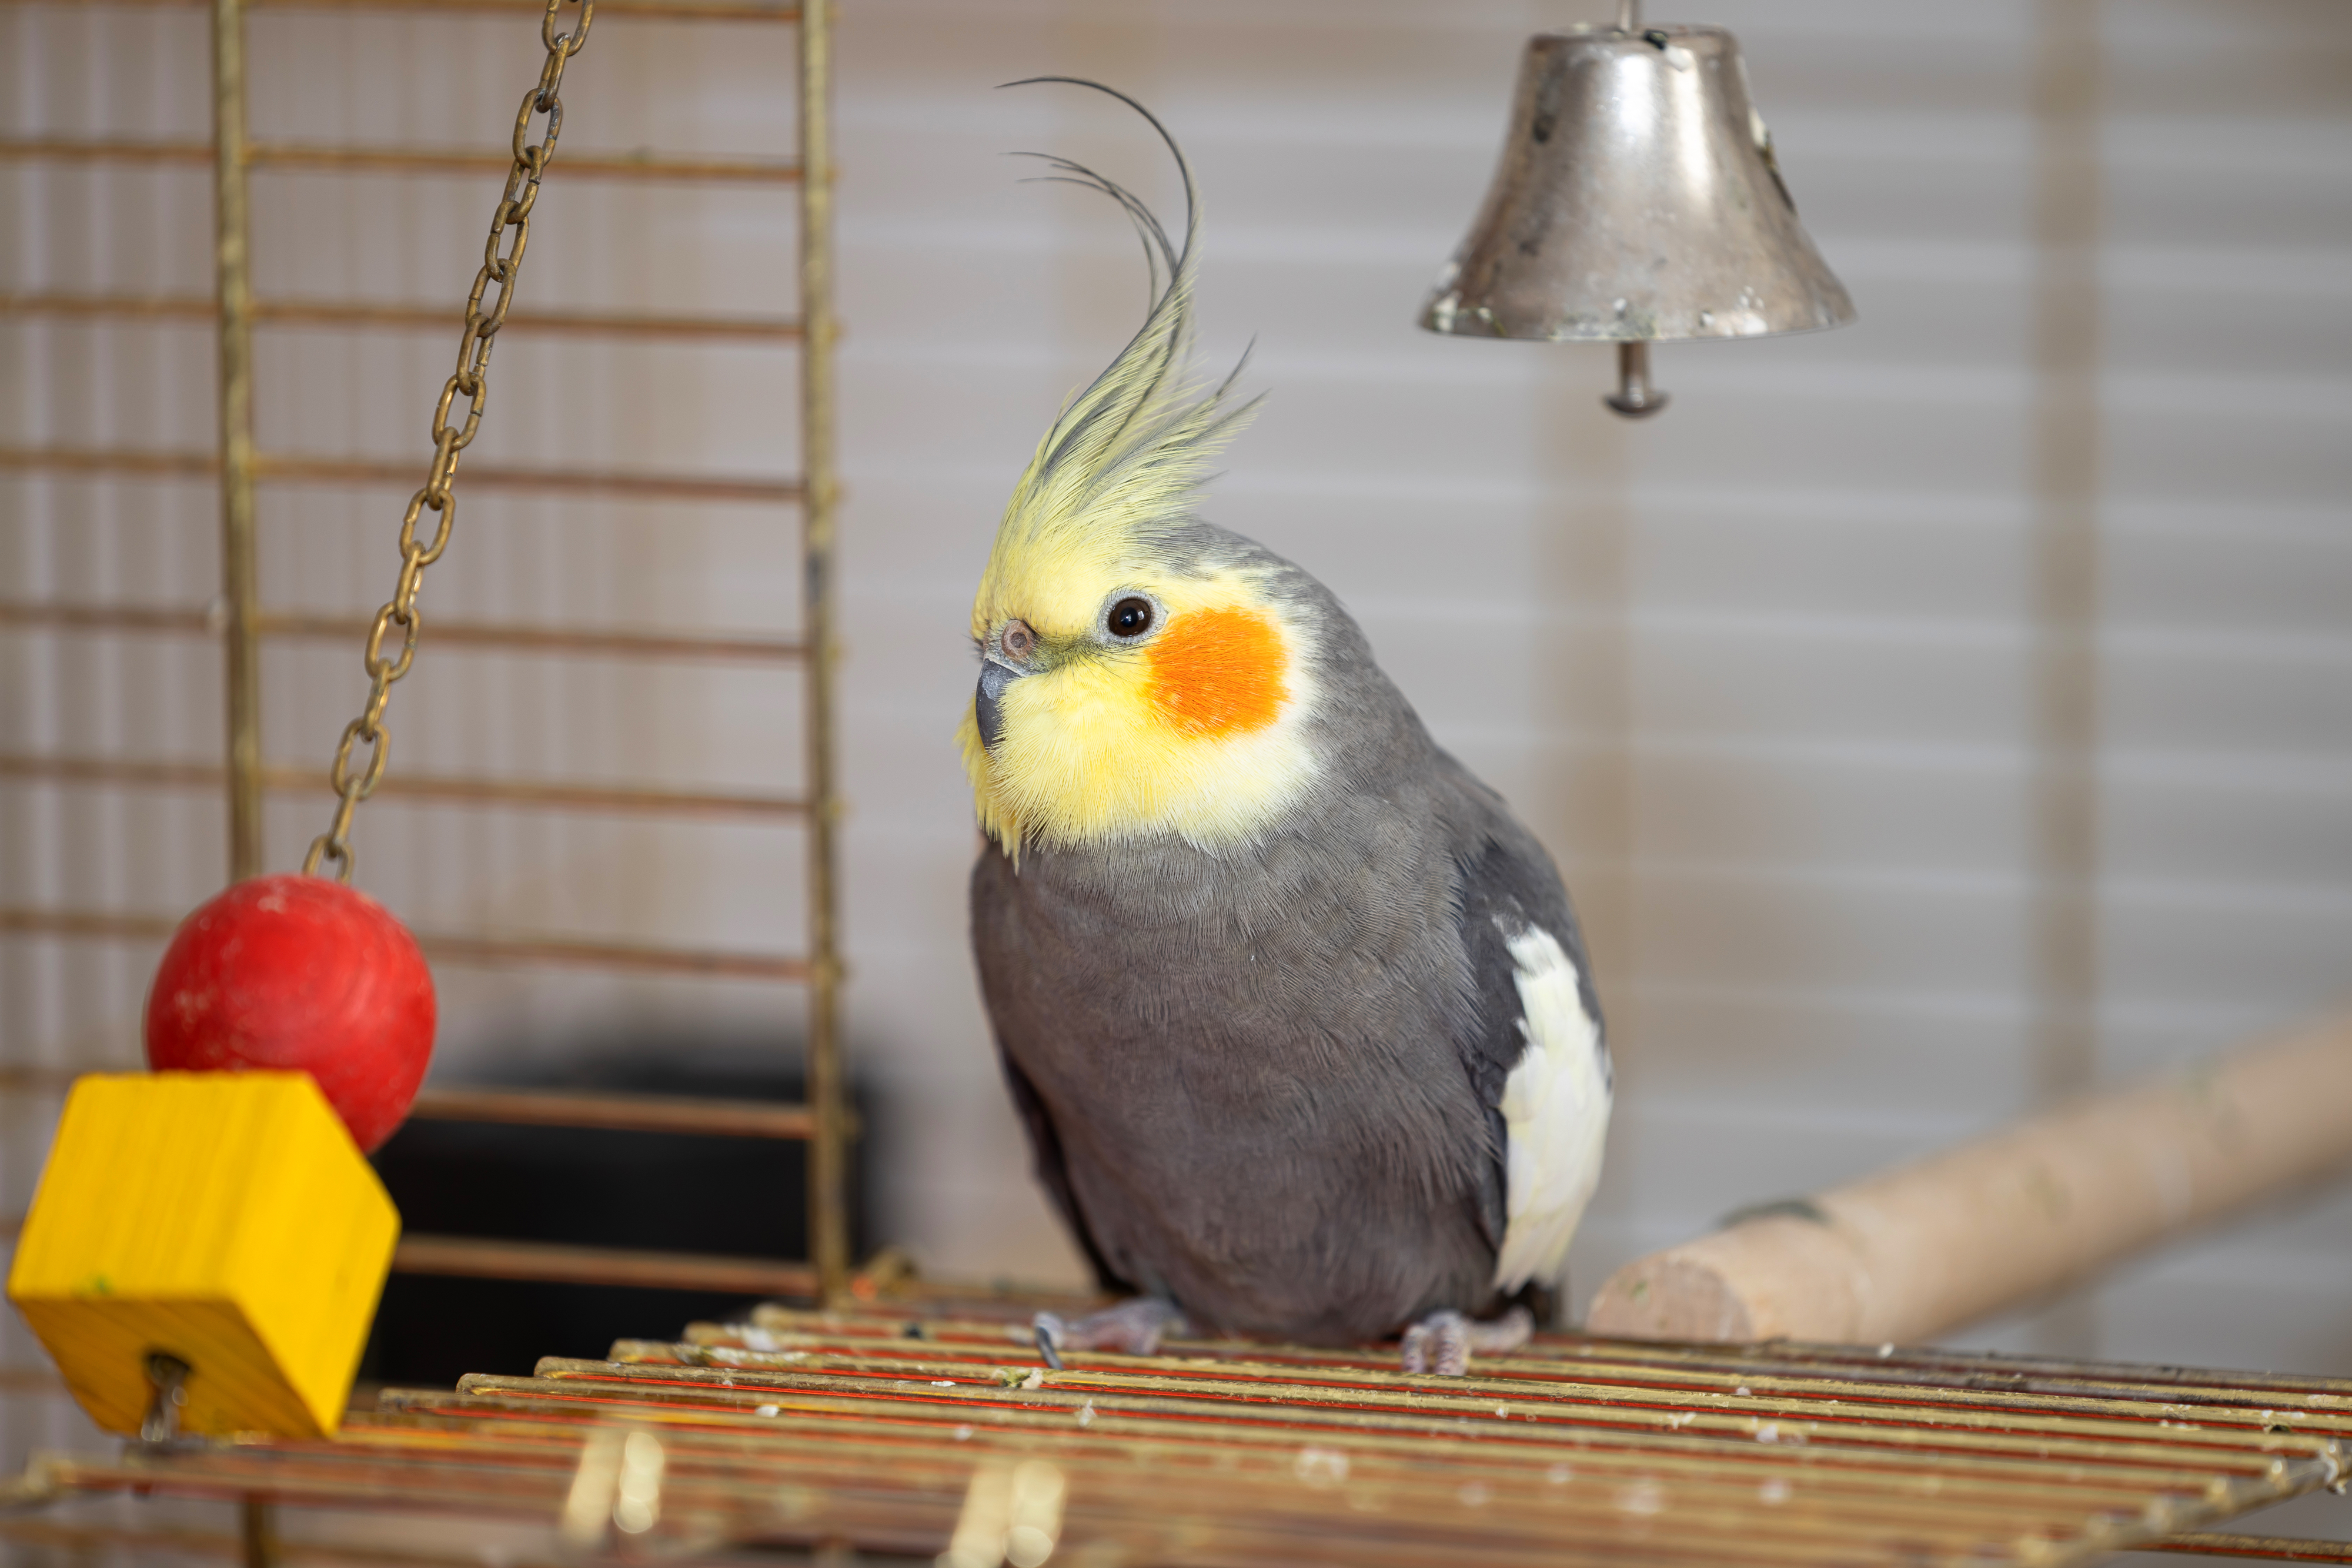 A cockatiel perched inside a cage with toys